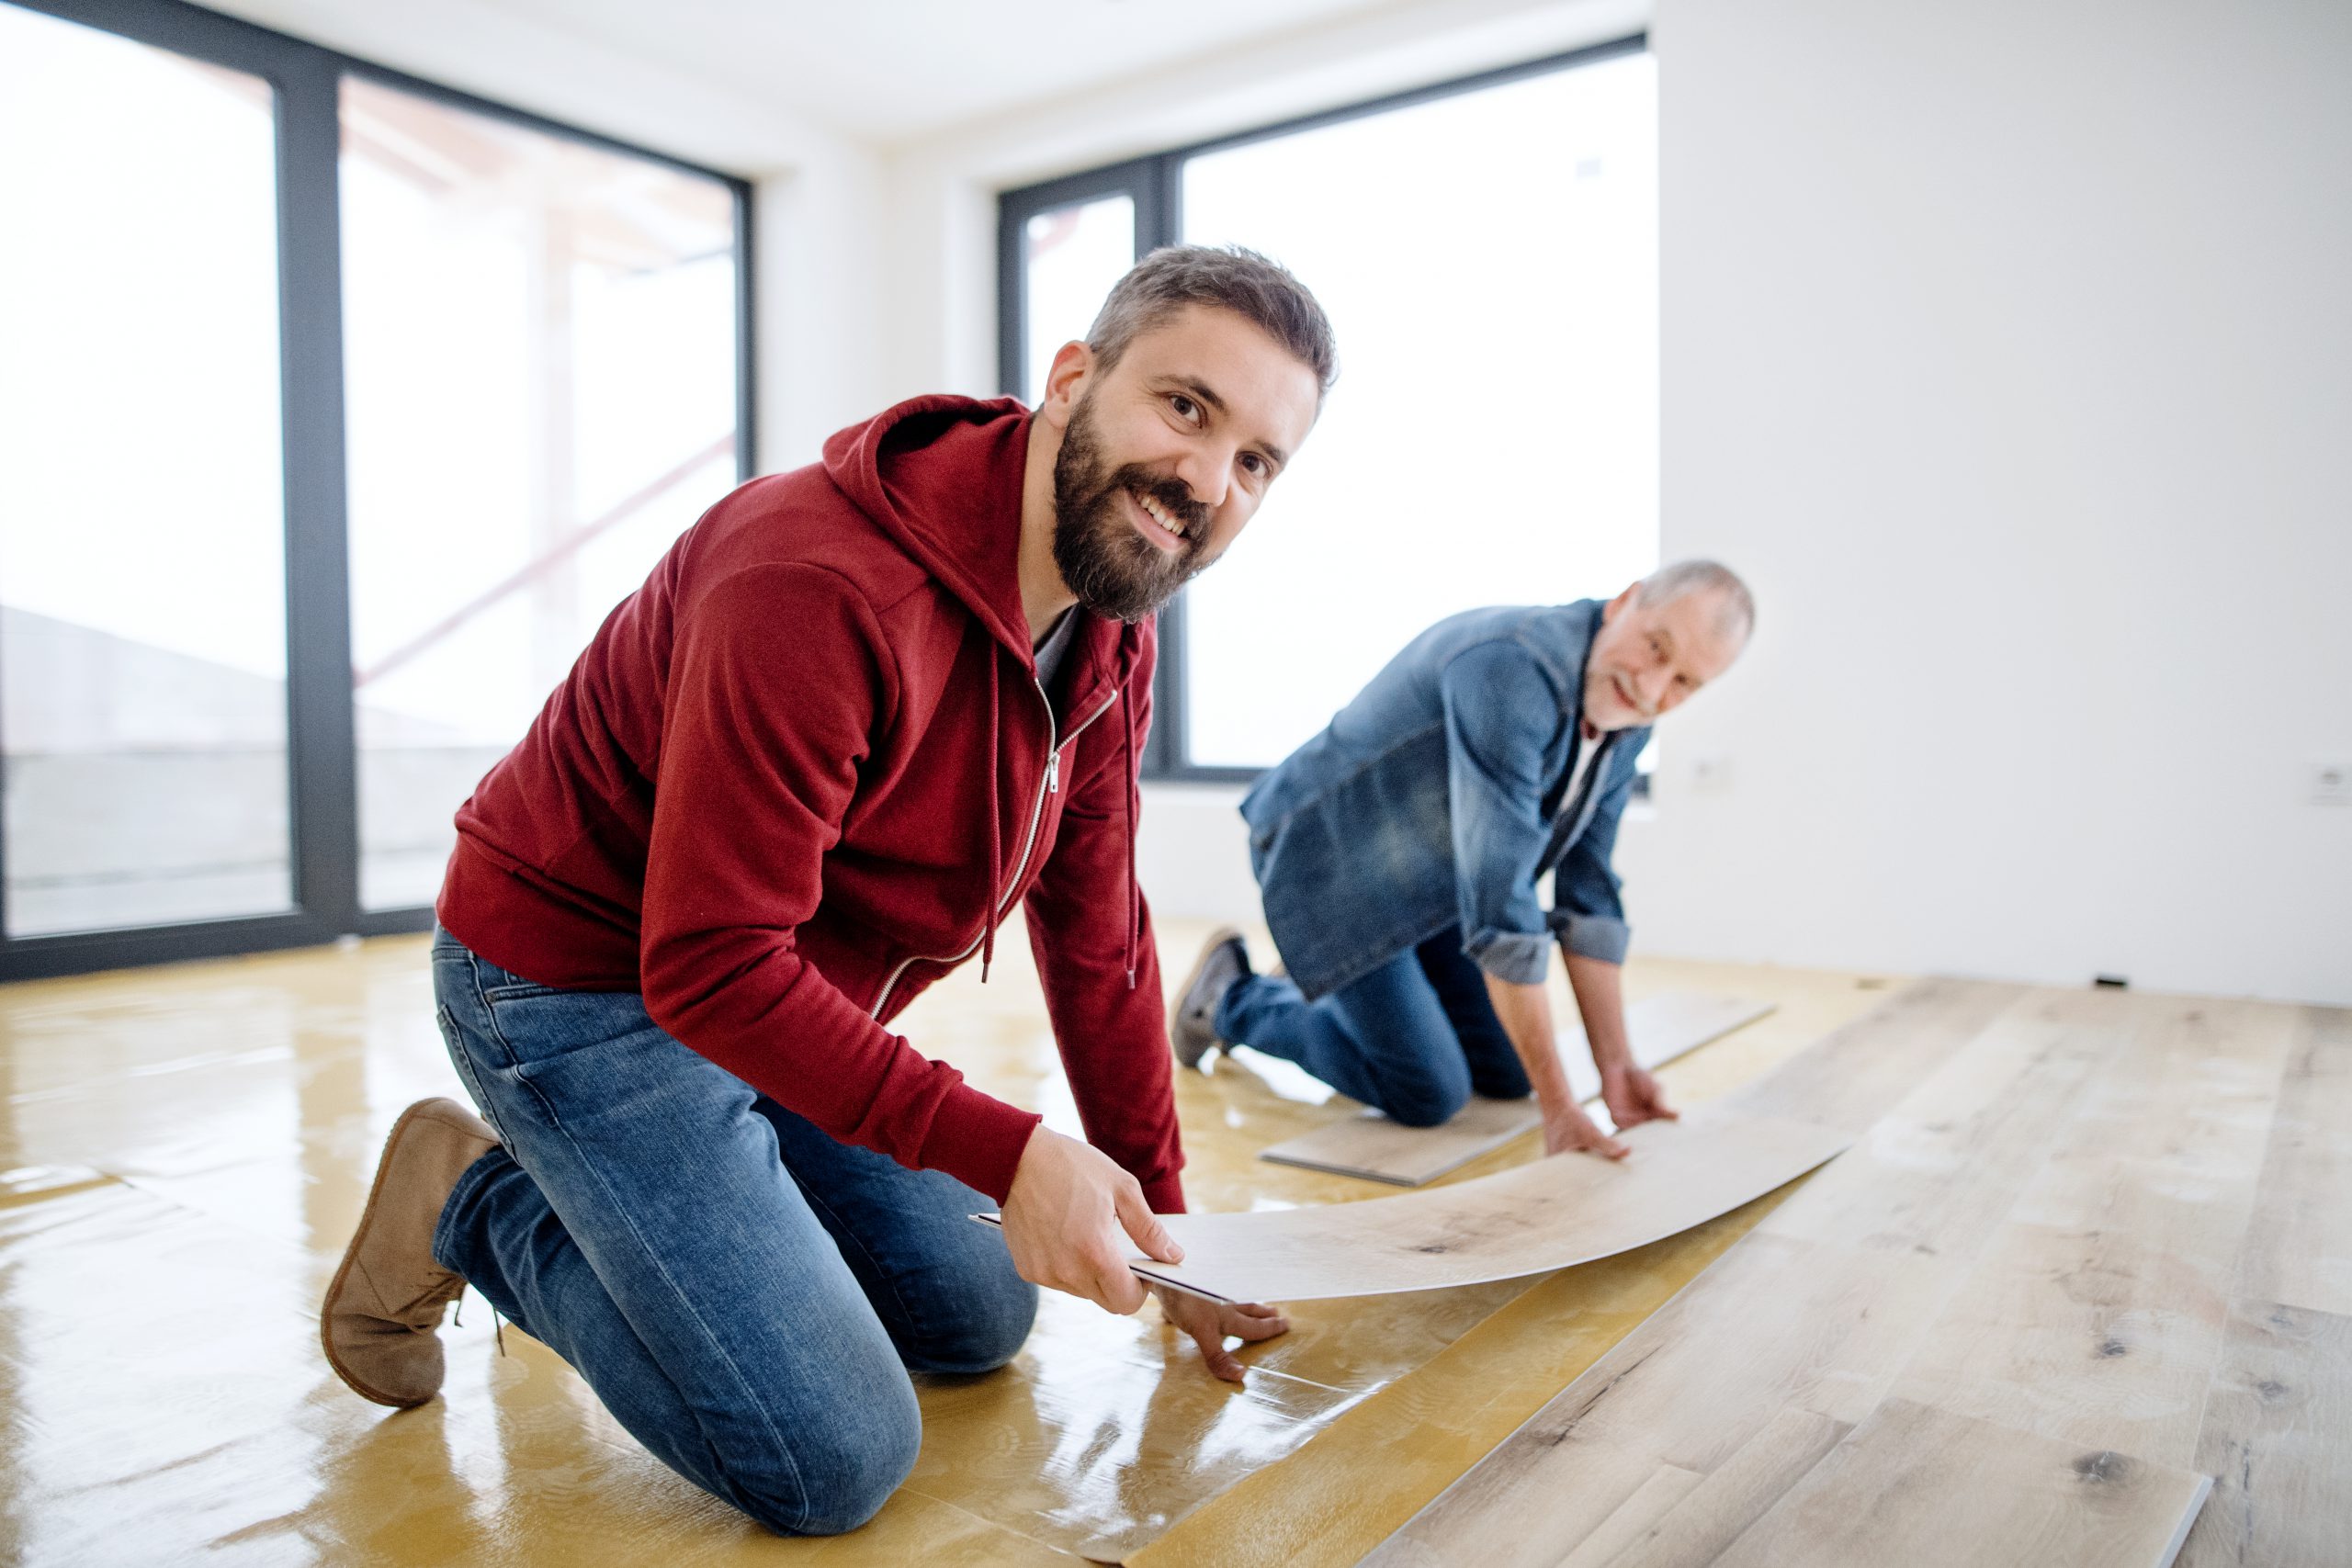 A Mature Man With His Senior Father Laying Vinyl Flooring, A New Home Concept.